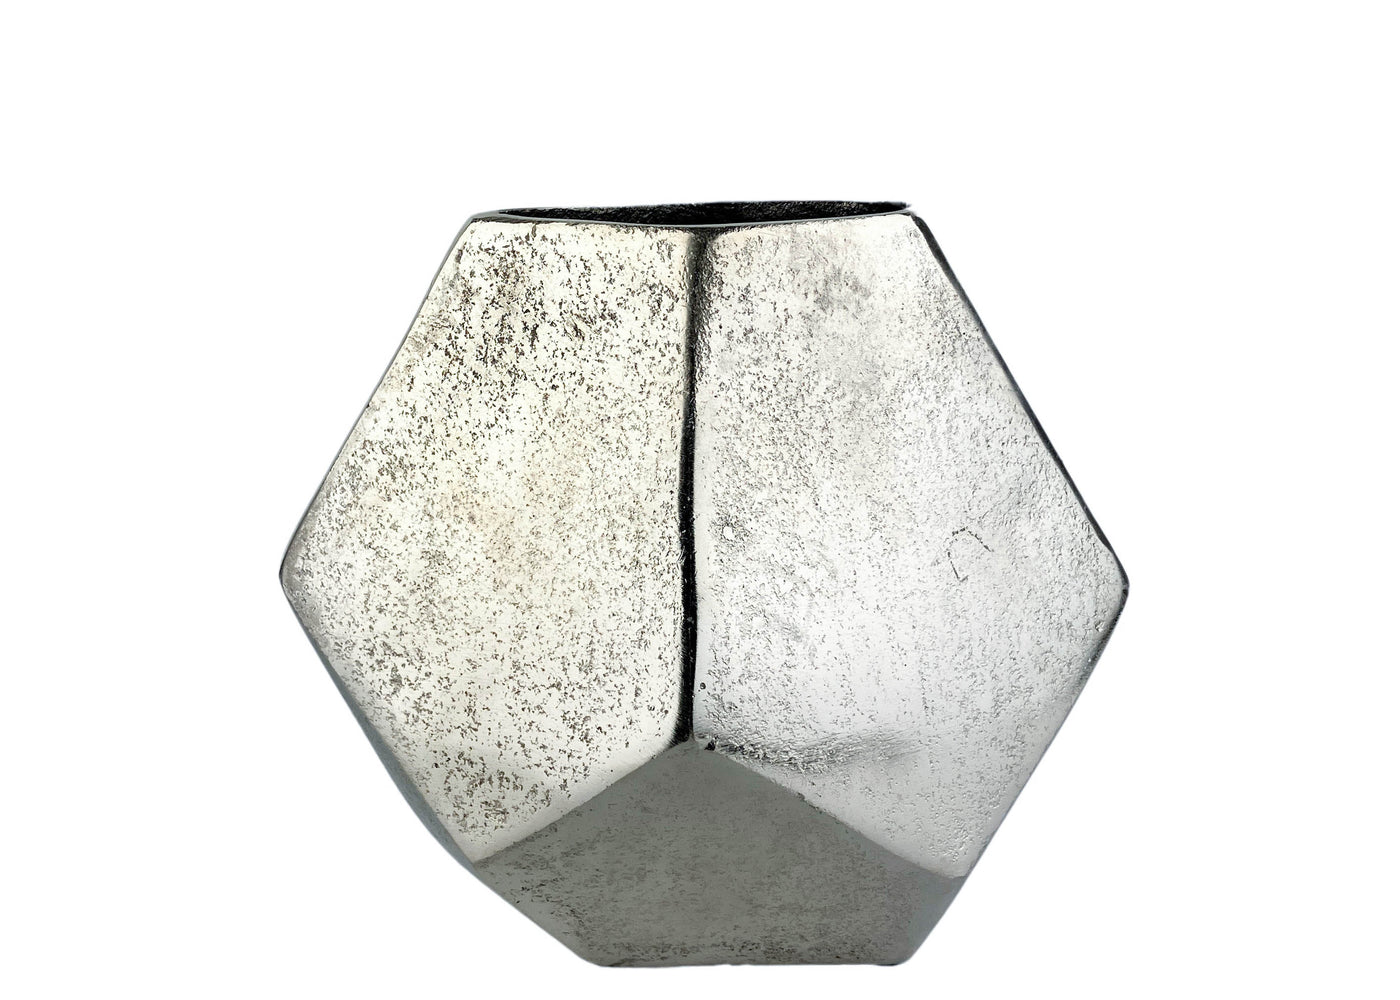 Tozai Home Set of 3 Diamond Shaped Vases in Silver - Discounts on Tozai Home at UAL